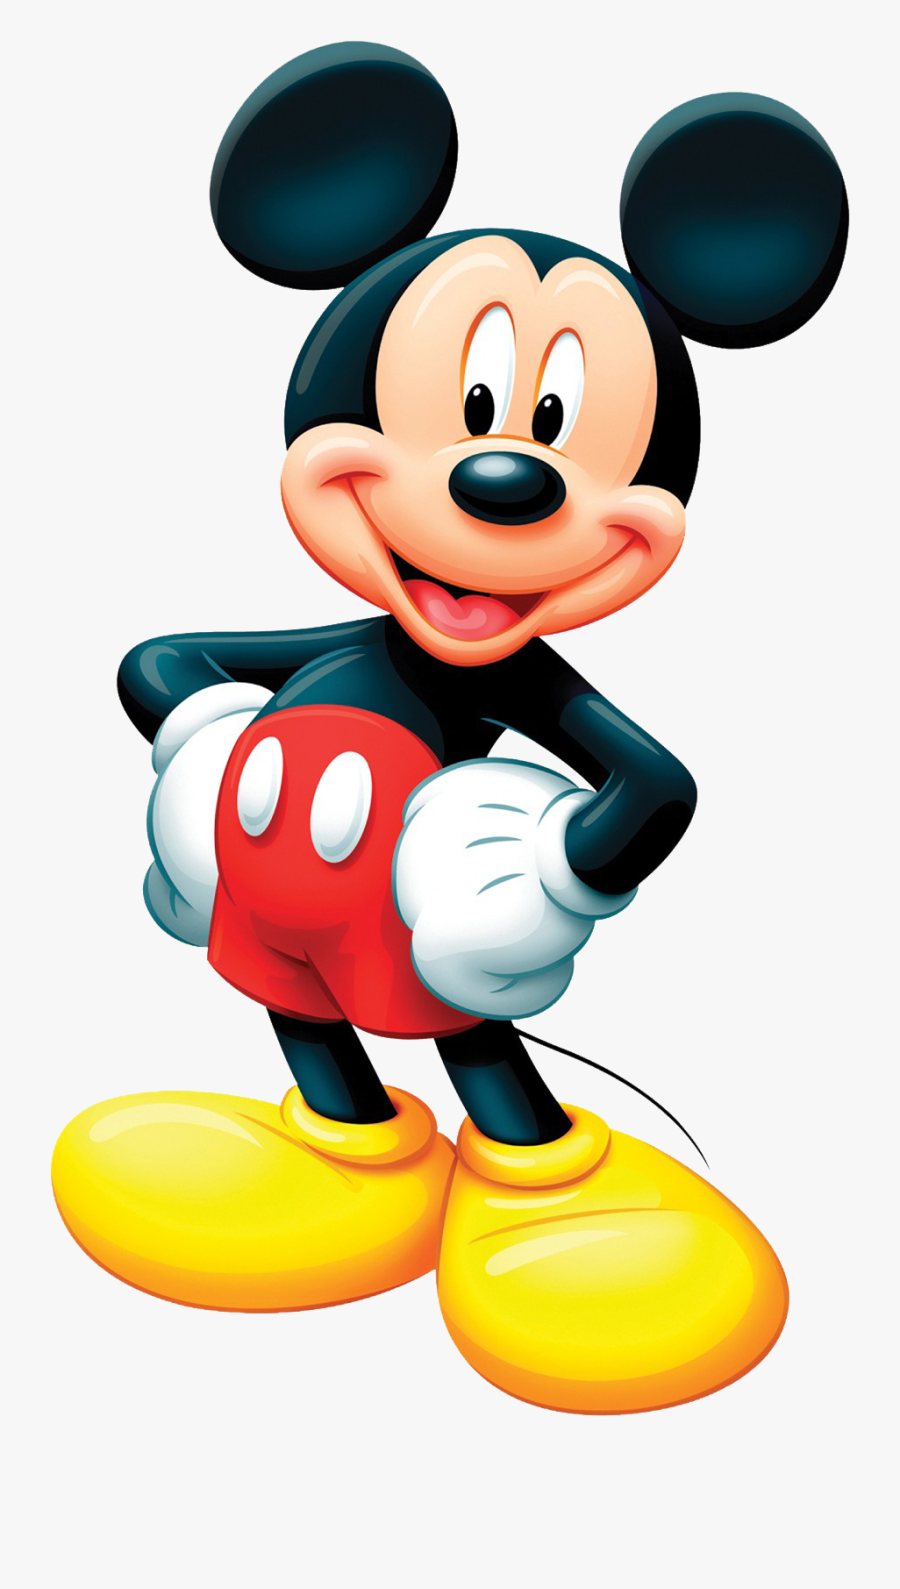 Cruise Clipart Mickey Mouse - Mickey Mouse 2019, Transparent Clipart